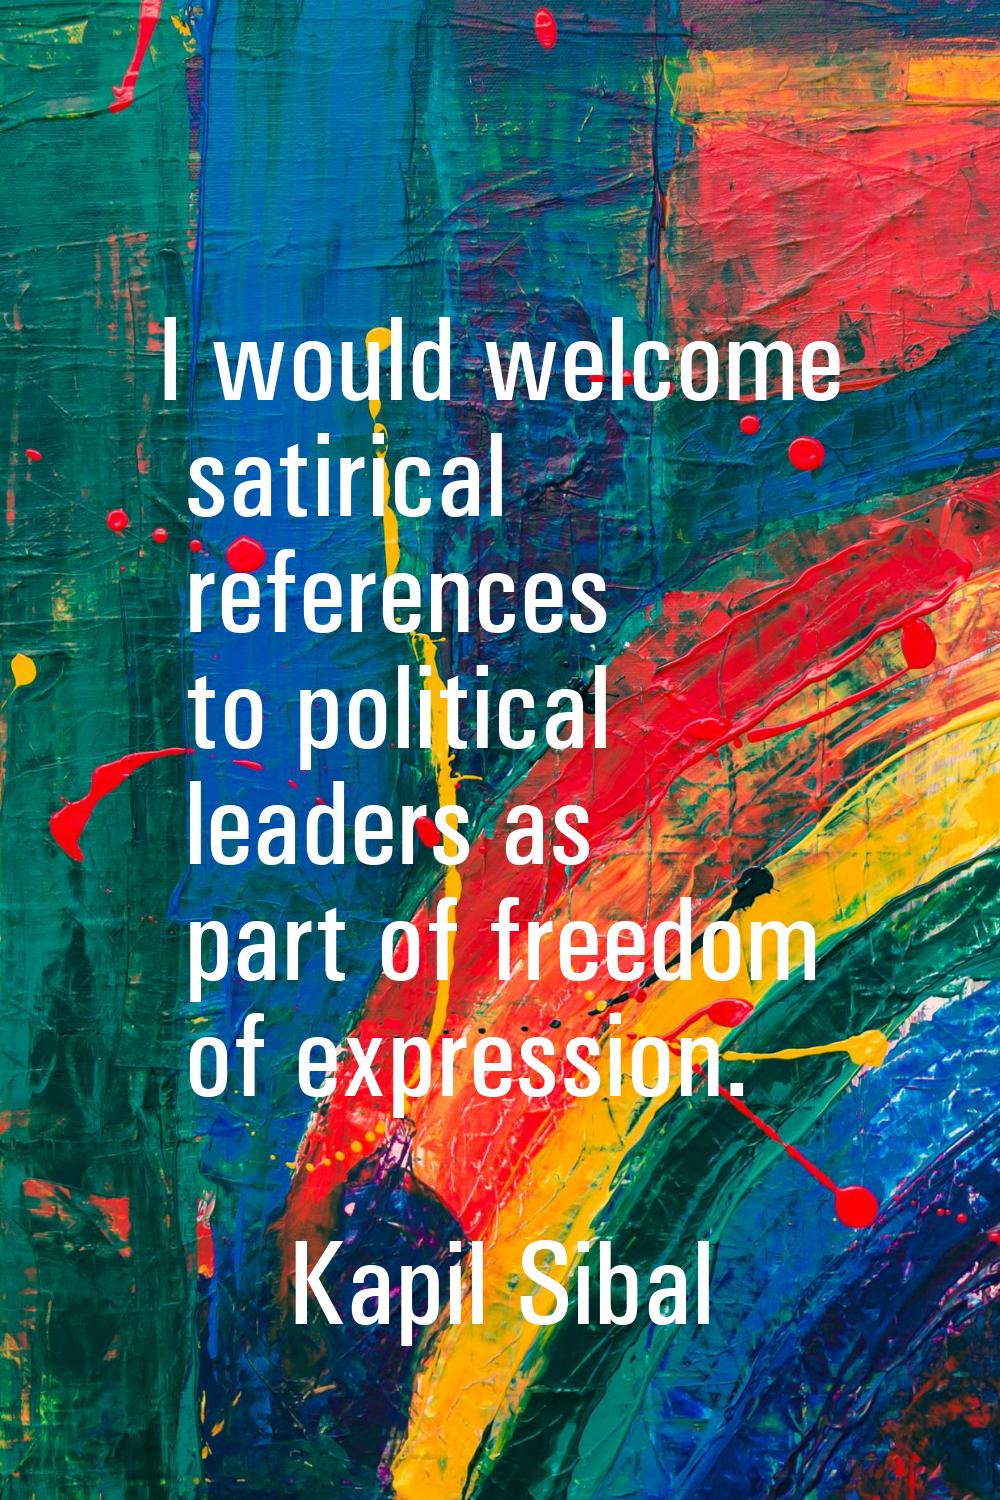 I would welcome satirical references to political leaders as part of freedom of expression.